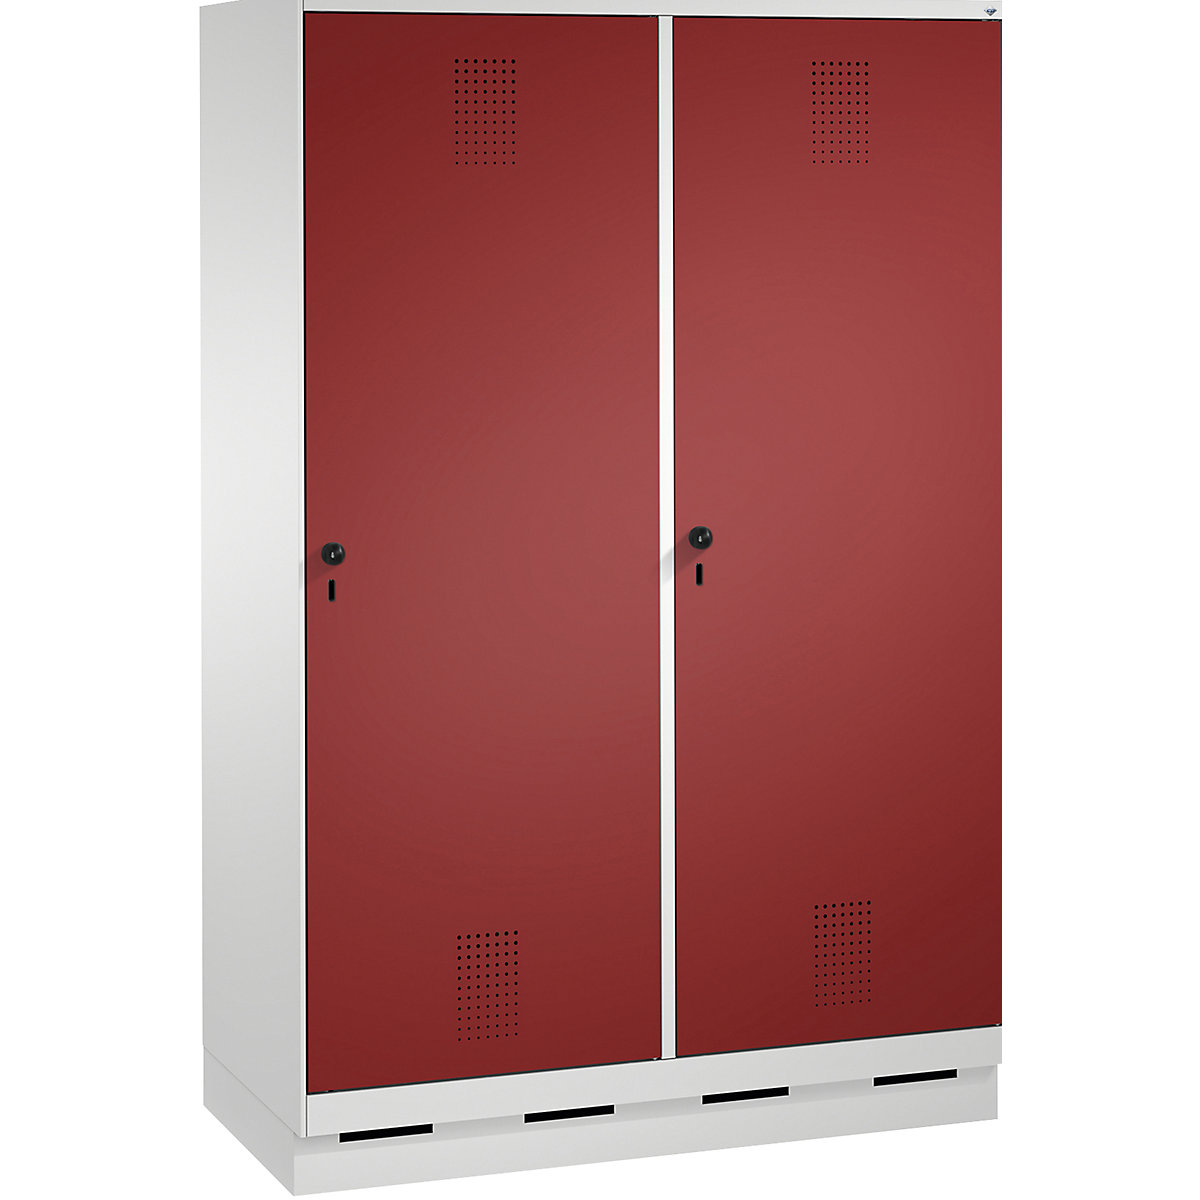 EVOLO cloakroom locker, door for 2 compartments, with plinth – C+P, 4 compartments, 2 doors, compartment width 300 mm, light grey / ruby red-9